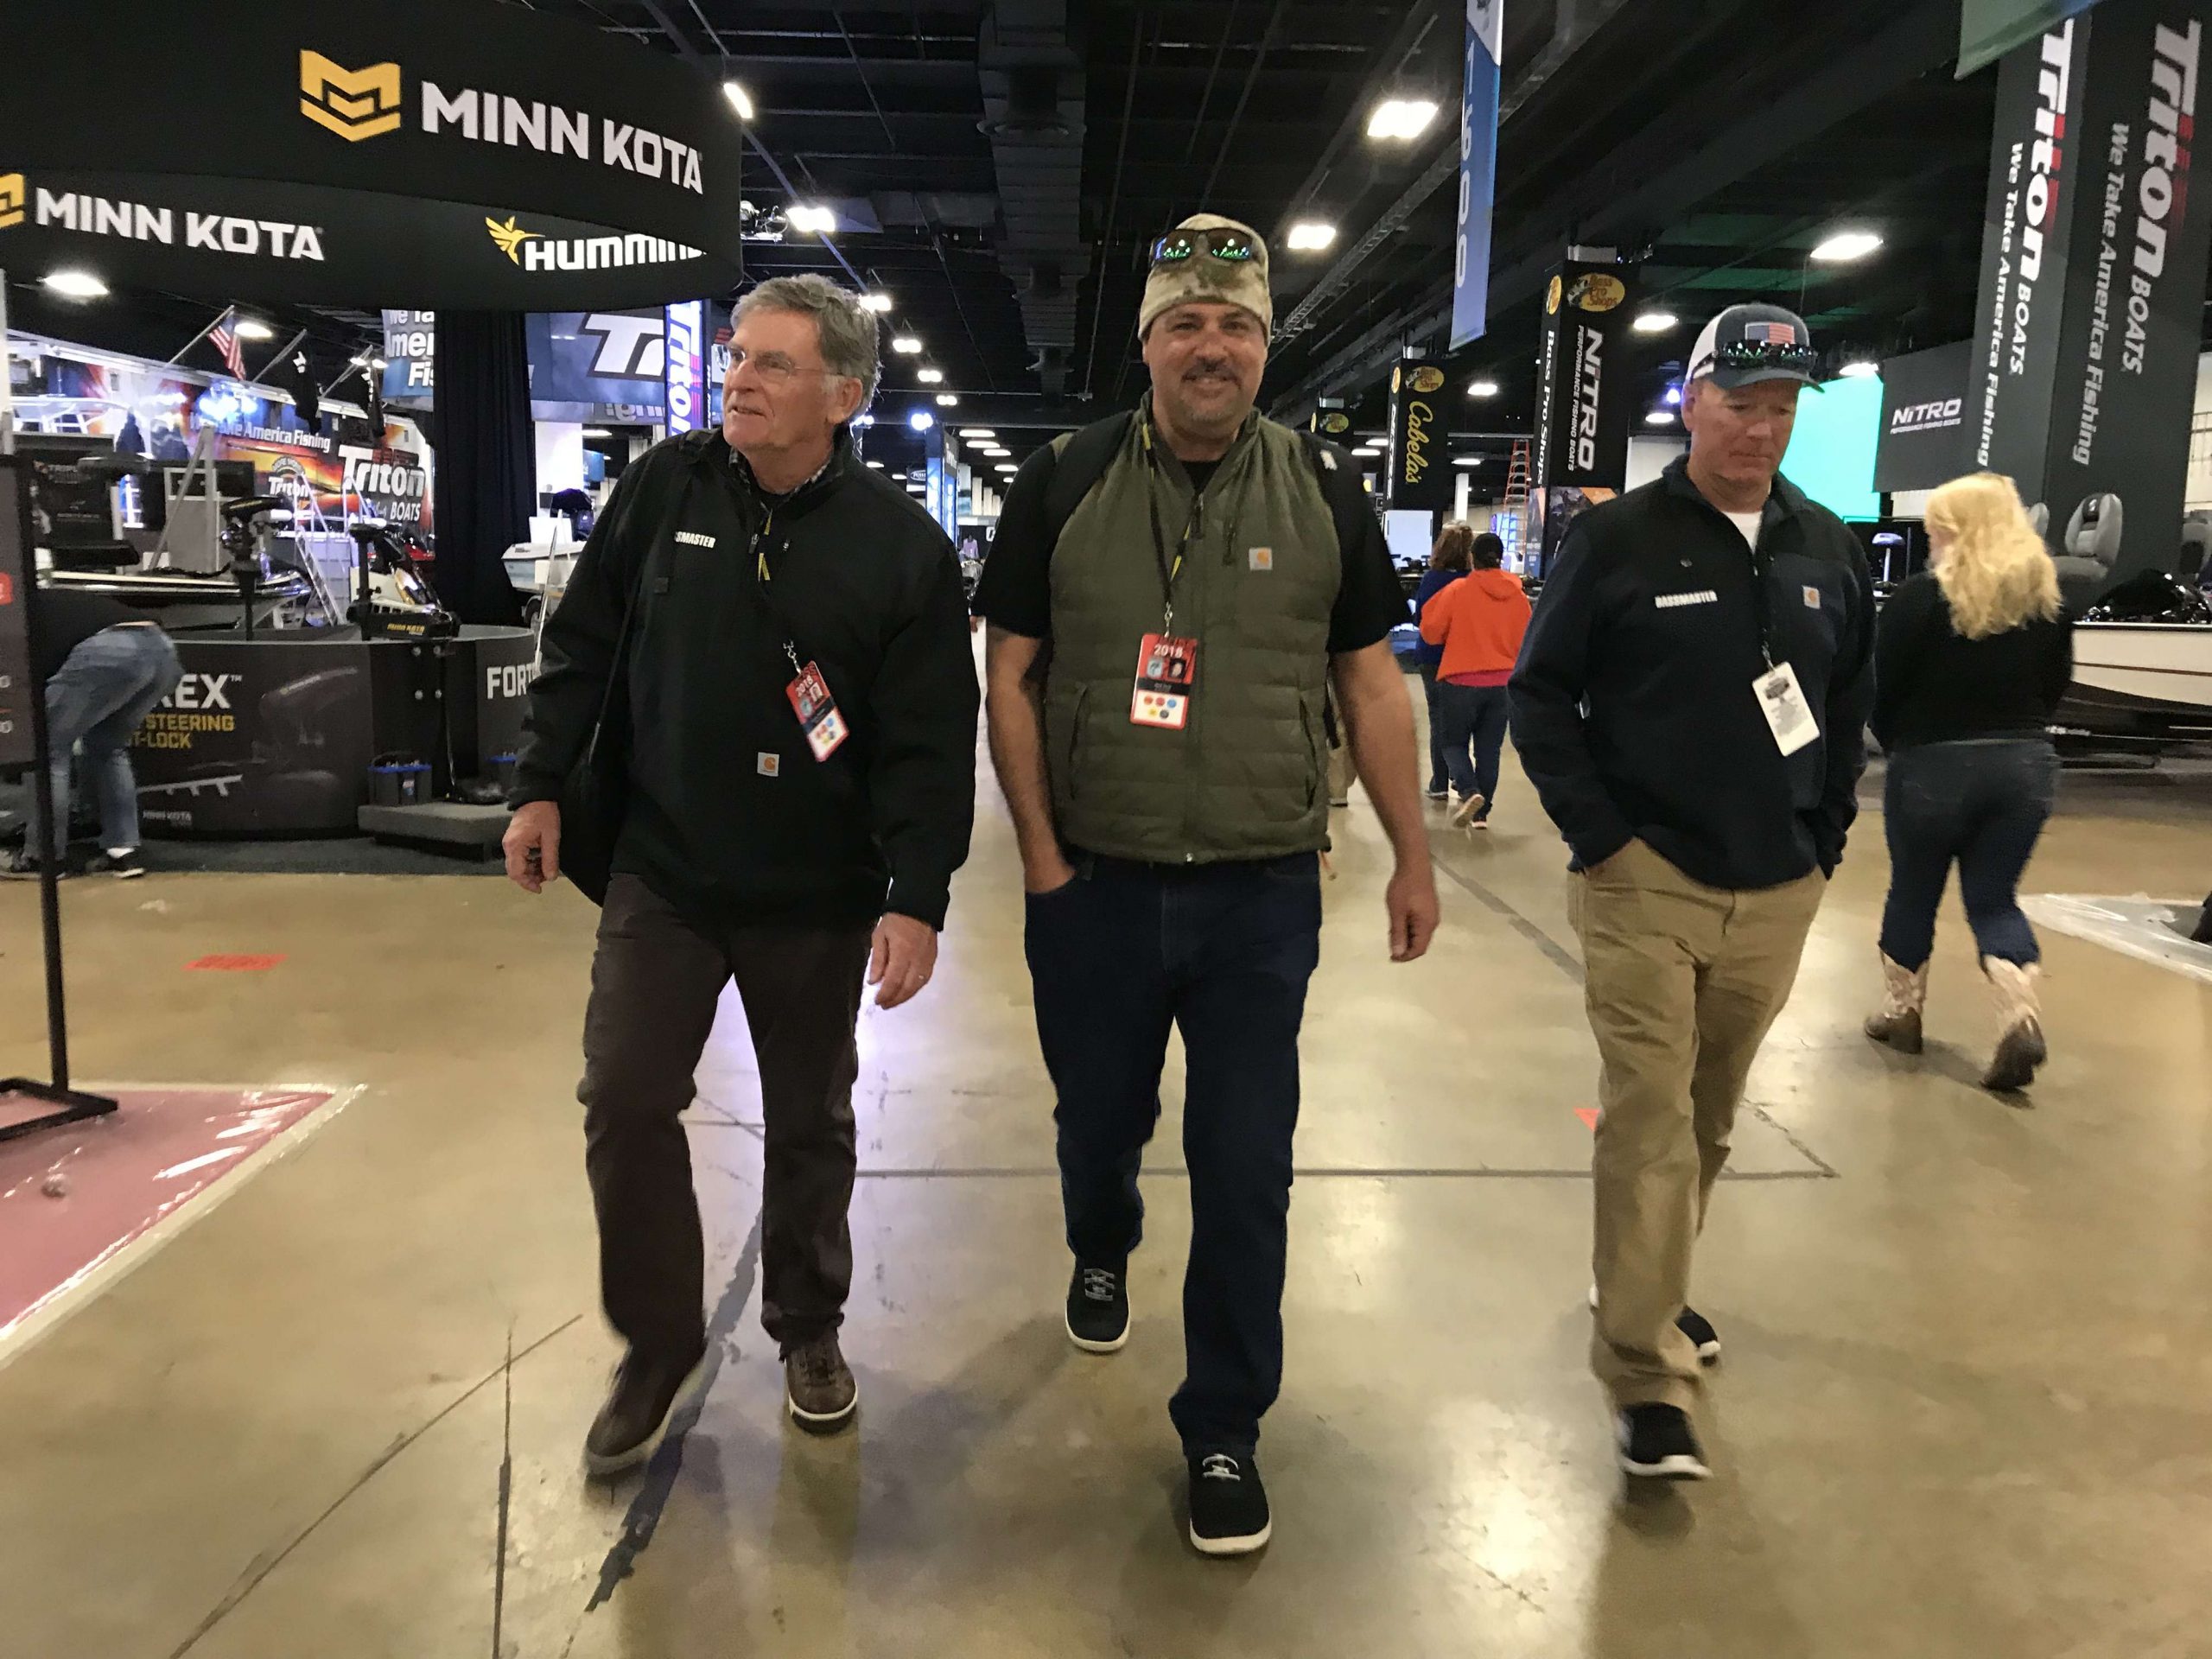 Host Tommy Sanders along with analysts Mark Zona and Davy Hite will have Bassmaster LIVE rolling each day of competition. LIVE airs daily from 8 a.m. to 11 a.m. ET and comes back on from noon-3 p.m. Expect tons of action as the on-the-water camera crew has doubled to 10 and expanded Skype capabilities can look in on every competitor. Ronnie Moore and Mike Suchan contribute to the show and will host Bassmasterâs Facebook Live airings at 7:15 a.m. and 11:15 a.m.